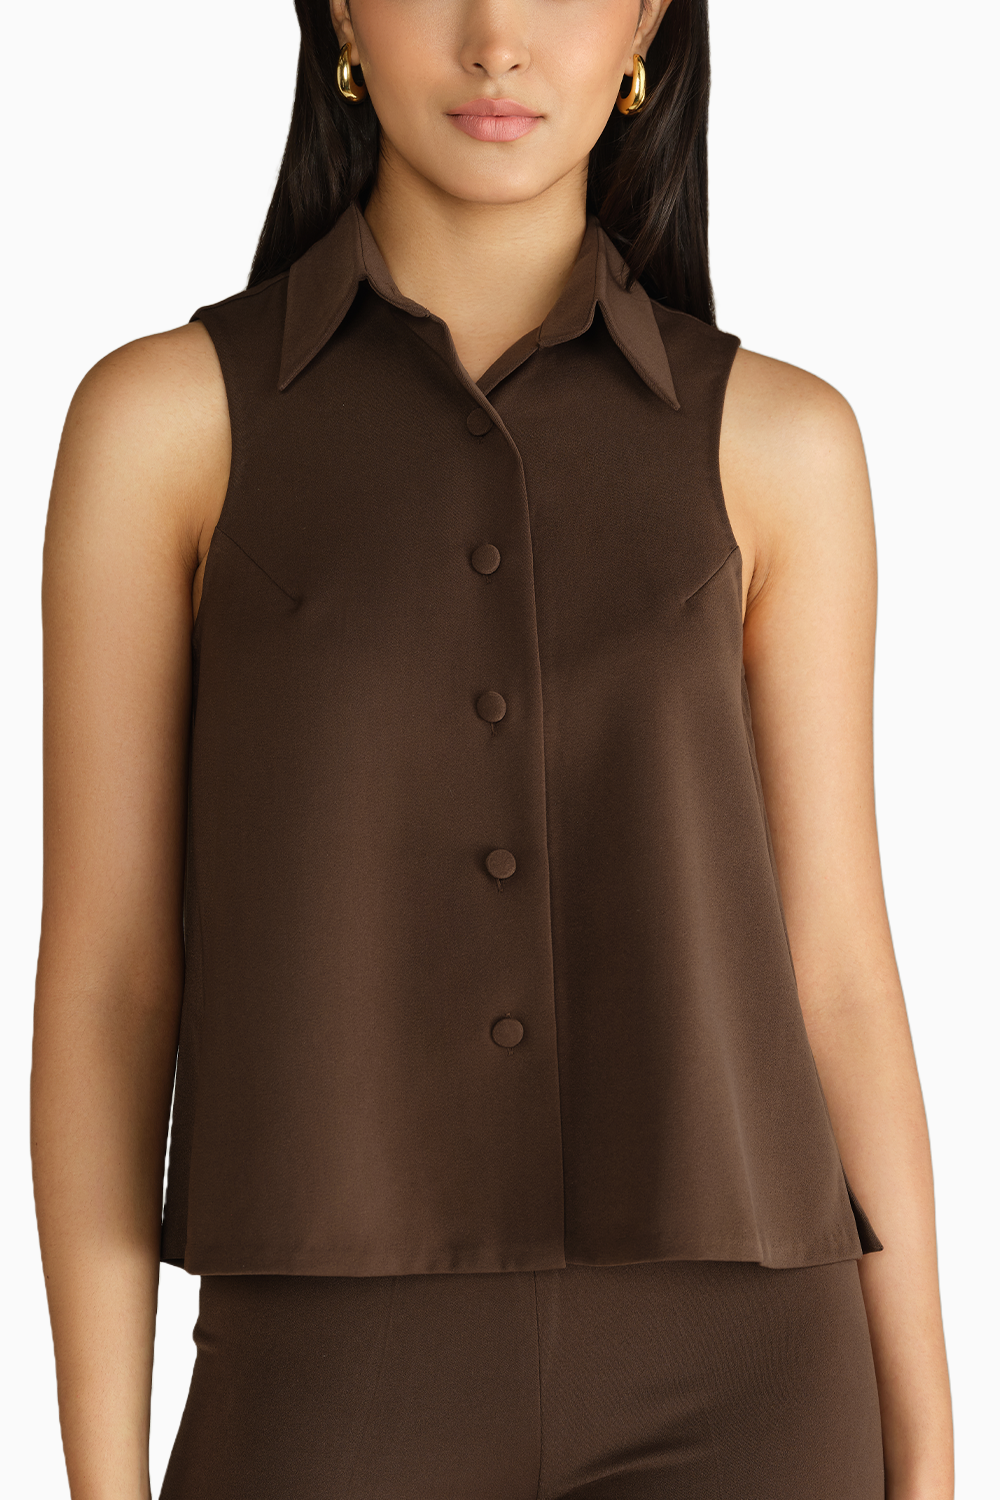 Chocolate Brown Stretch Suiting Sleeveless Top